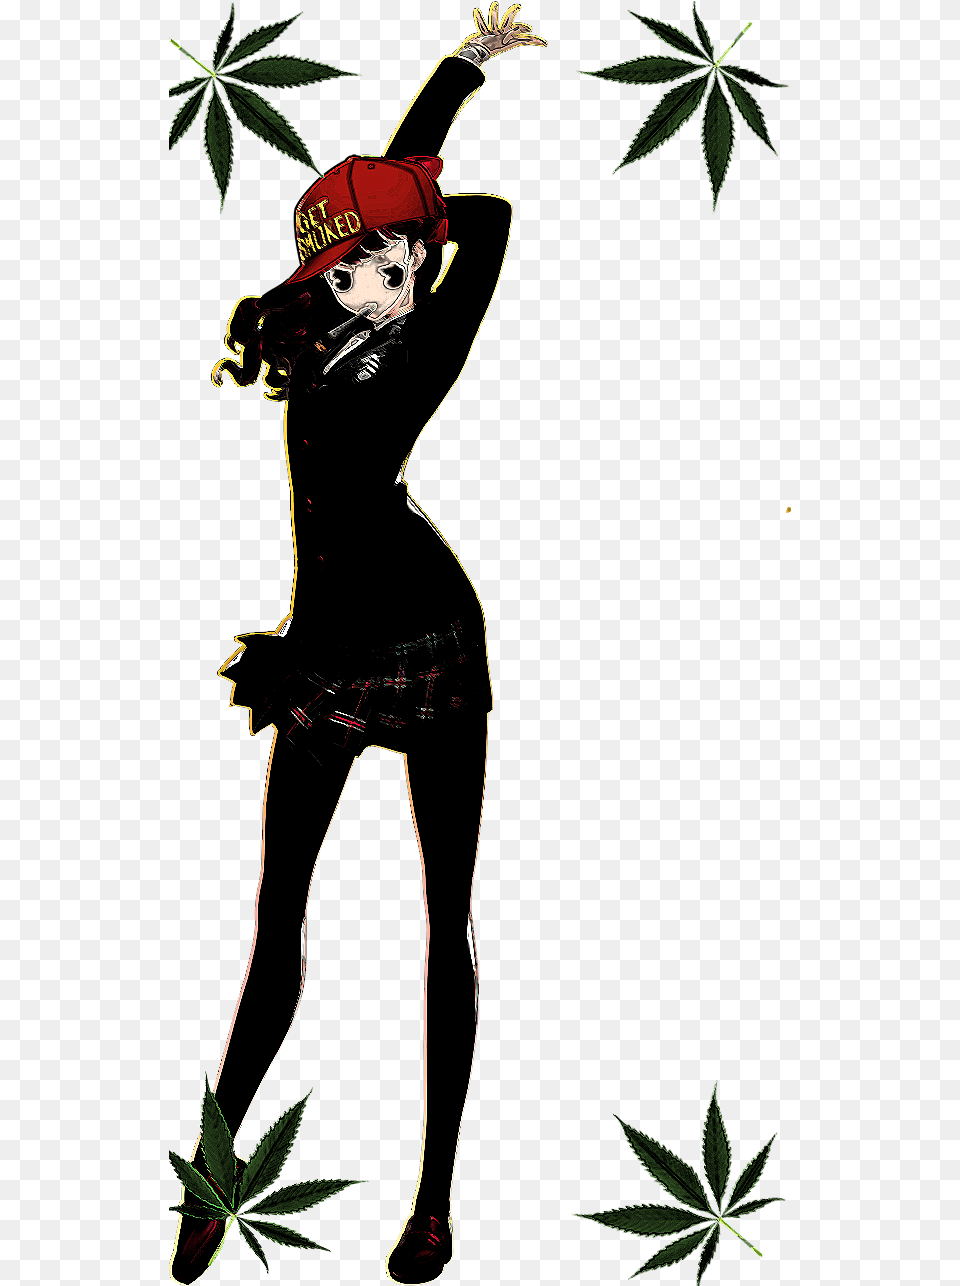 Phansite Forum Persona 5 New Girl, Leaf, Plant, Weed, Person Free Transparent Png